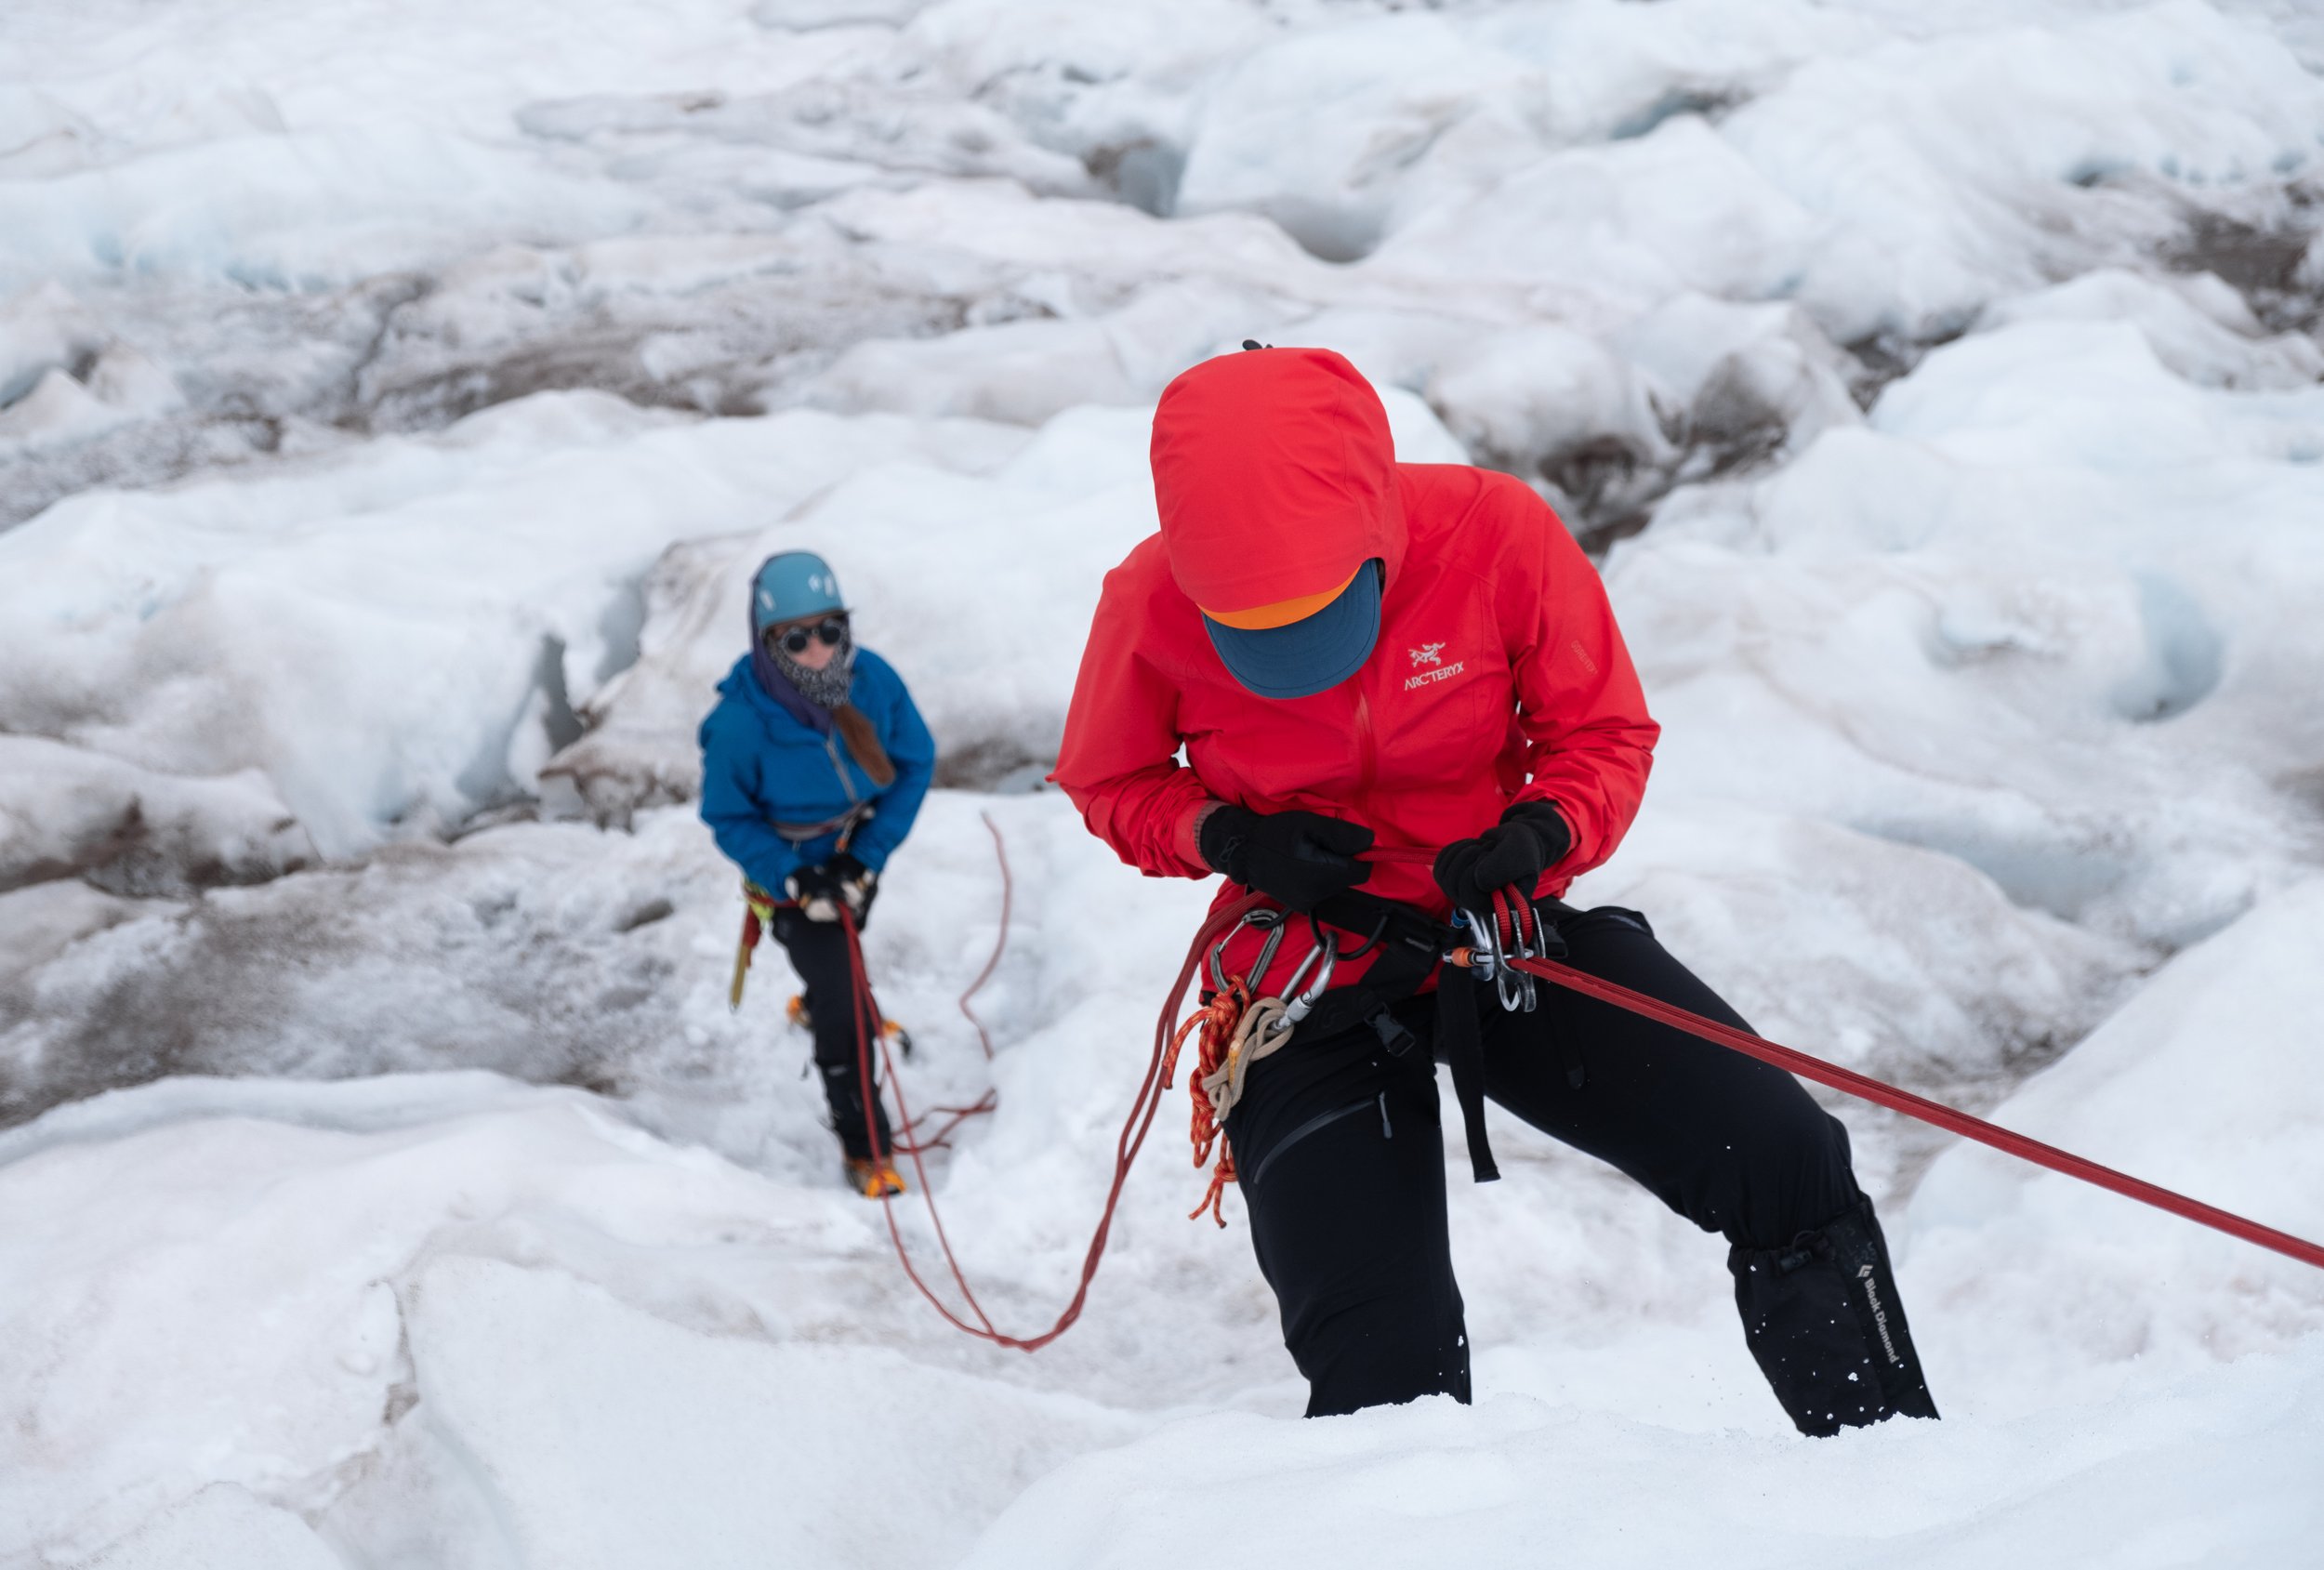 Climbers manage ropes while learning everything they need to climb denali